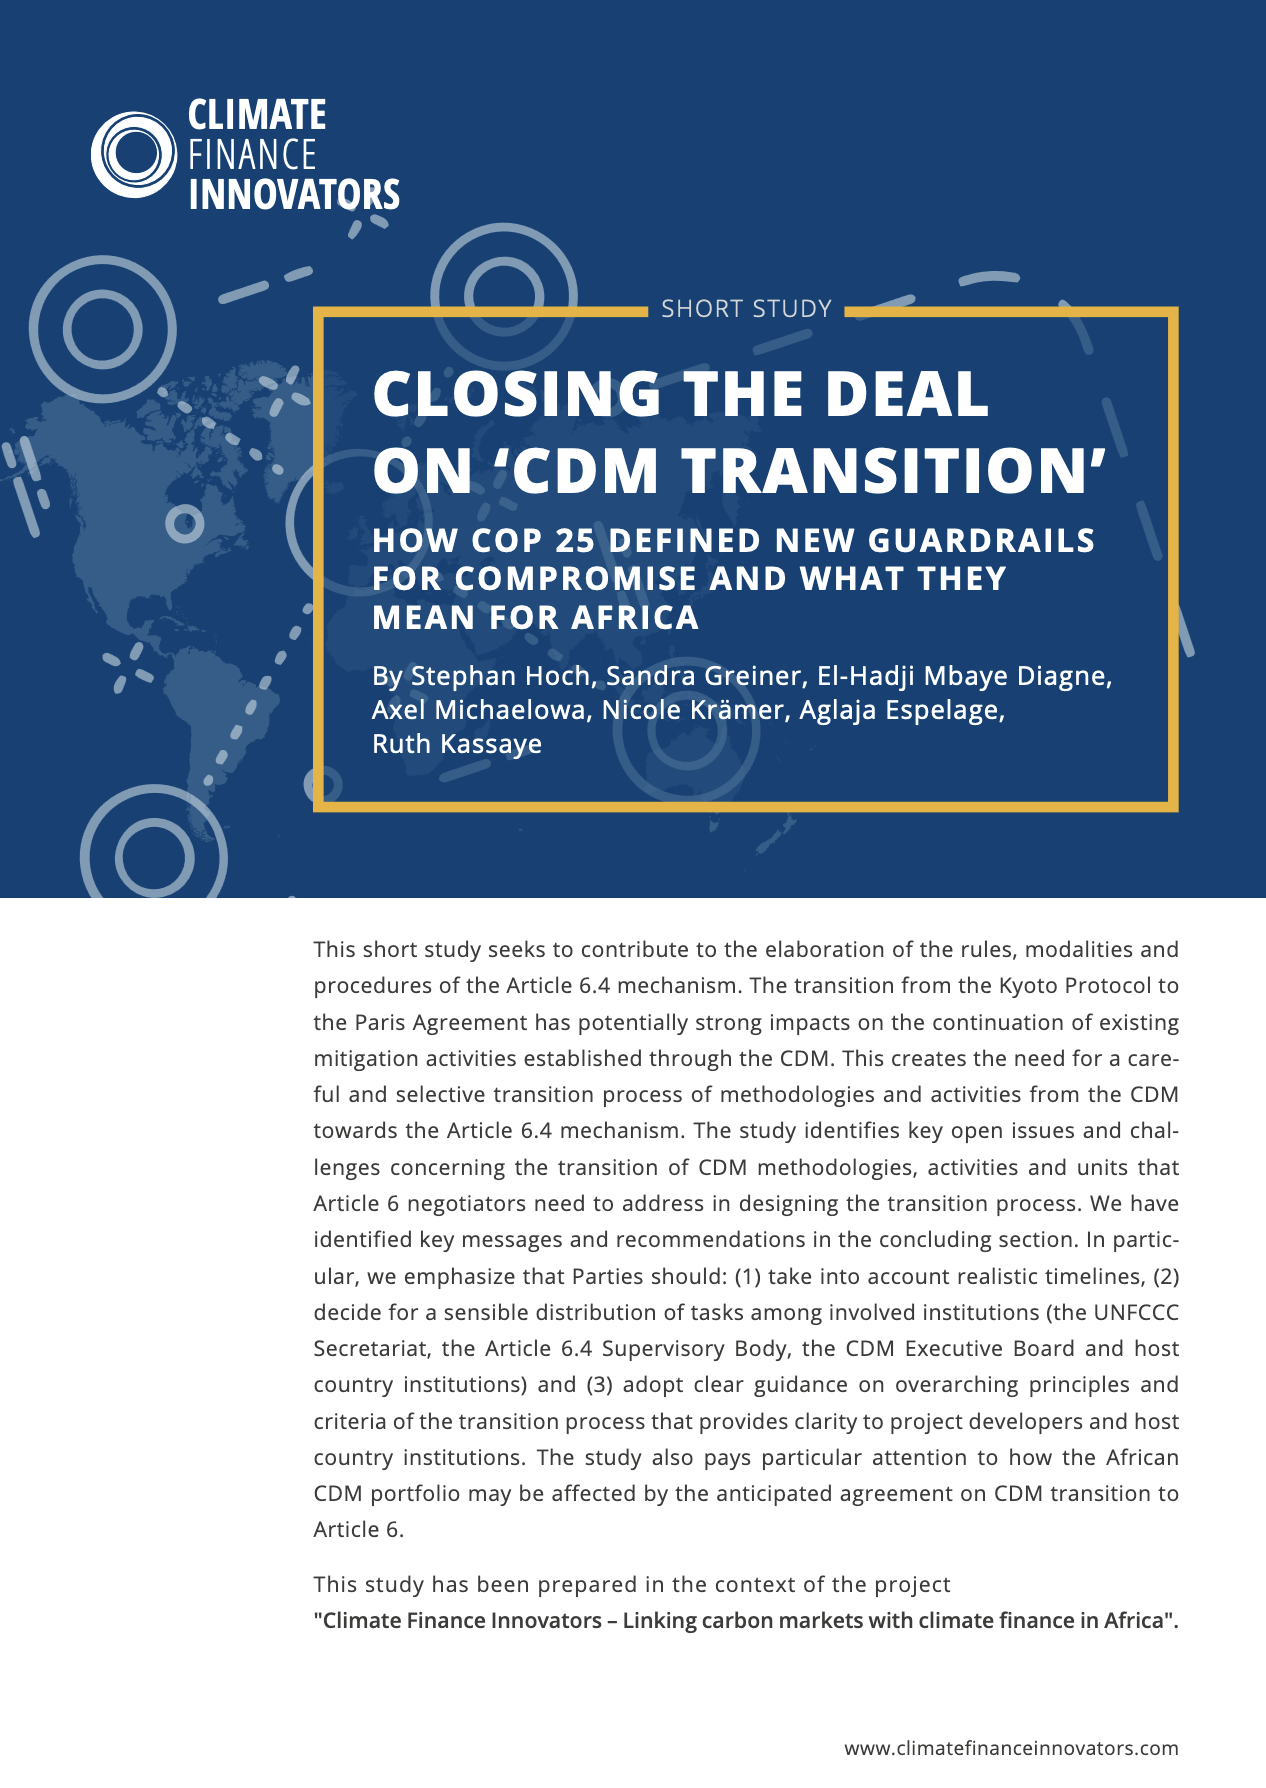 Closing the deal on CDM transition